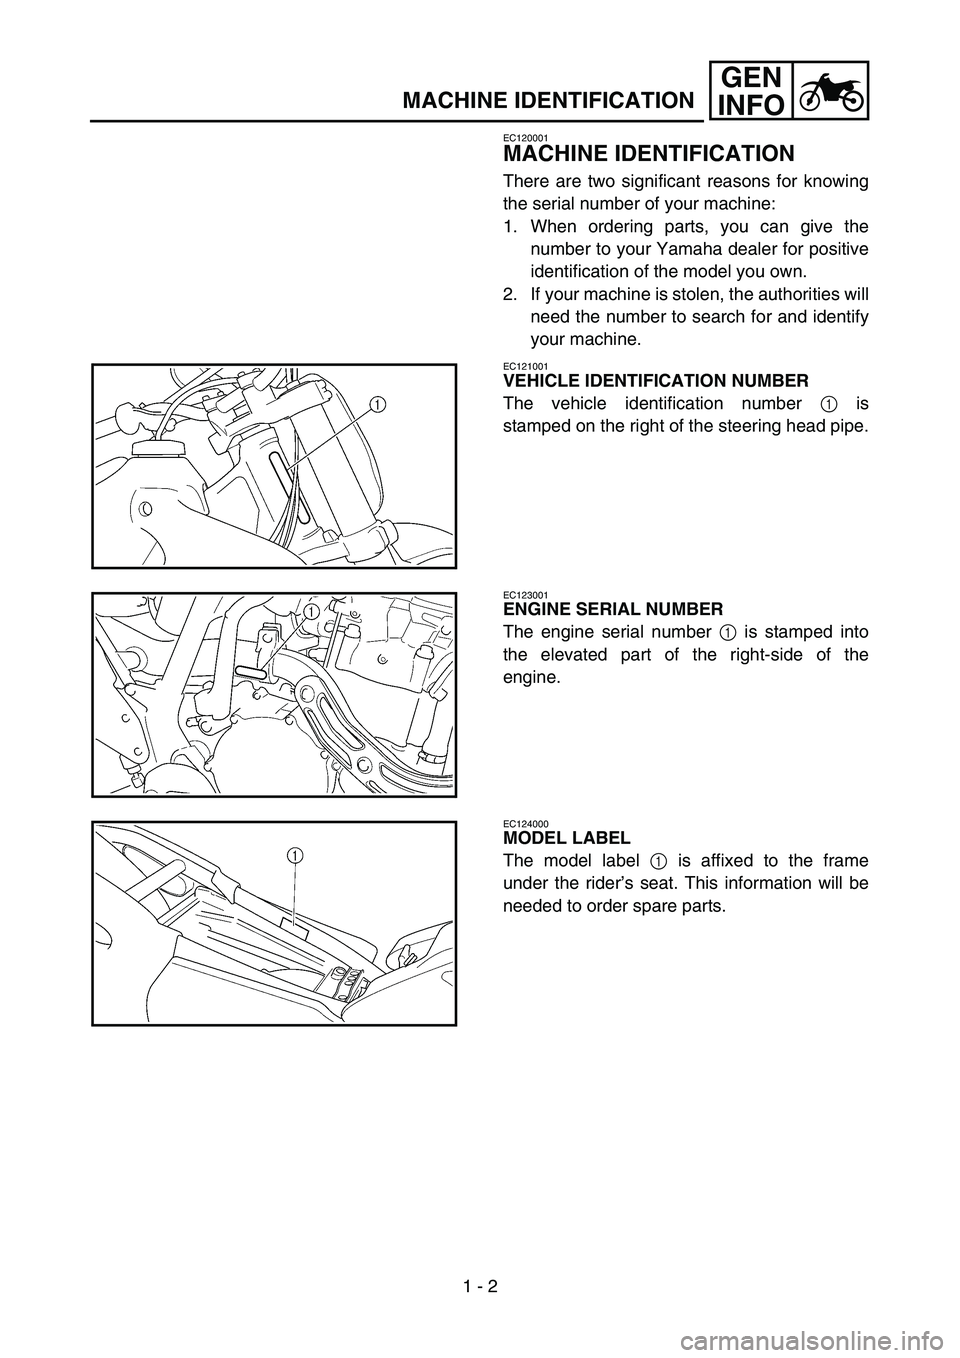 YAMAHA YZ250F 2007 Owners Manual 1 - 2
GEN
INFO
MACHINE IDENTIFICATION
EC120001
MACHINE IDENTIFICATION
There are two significant reasons for knowing
the serial number of your machine:
1. When ordering parts, you can give the
number t